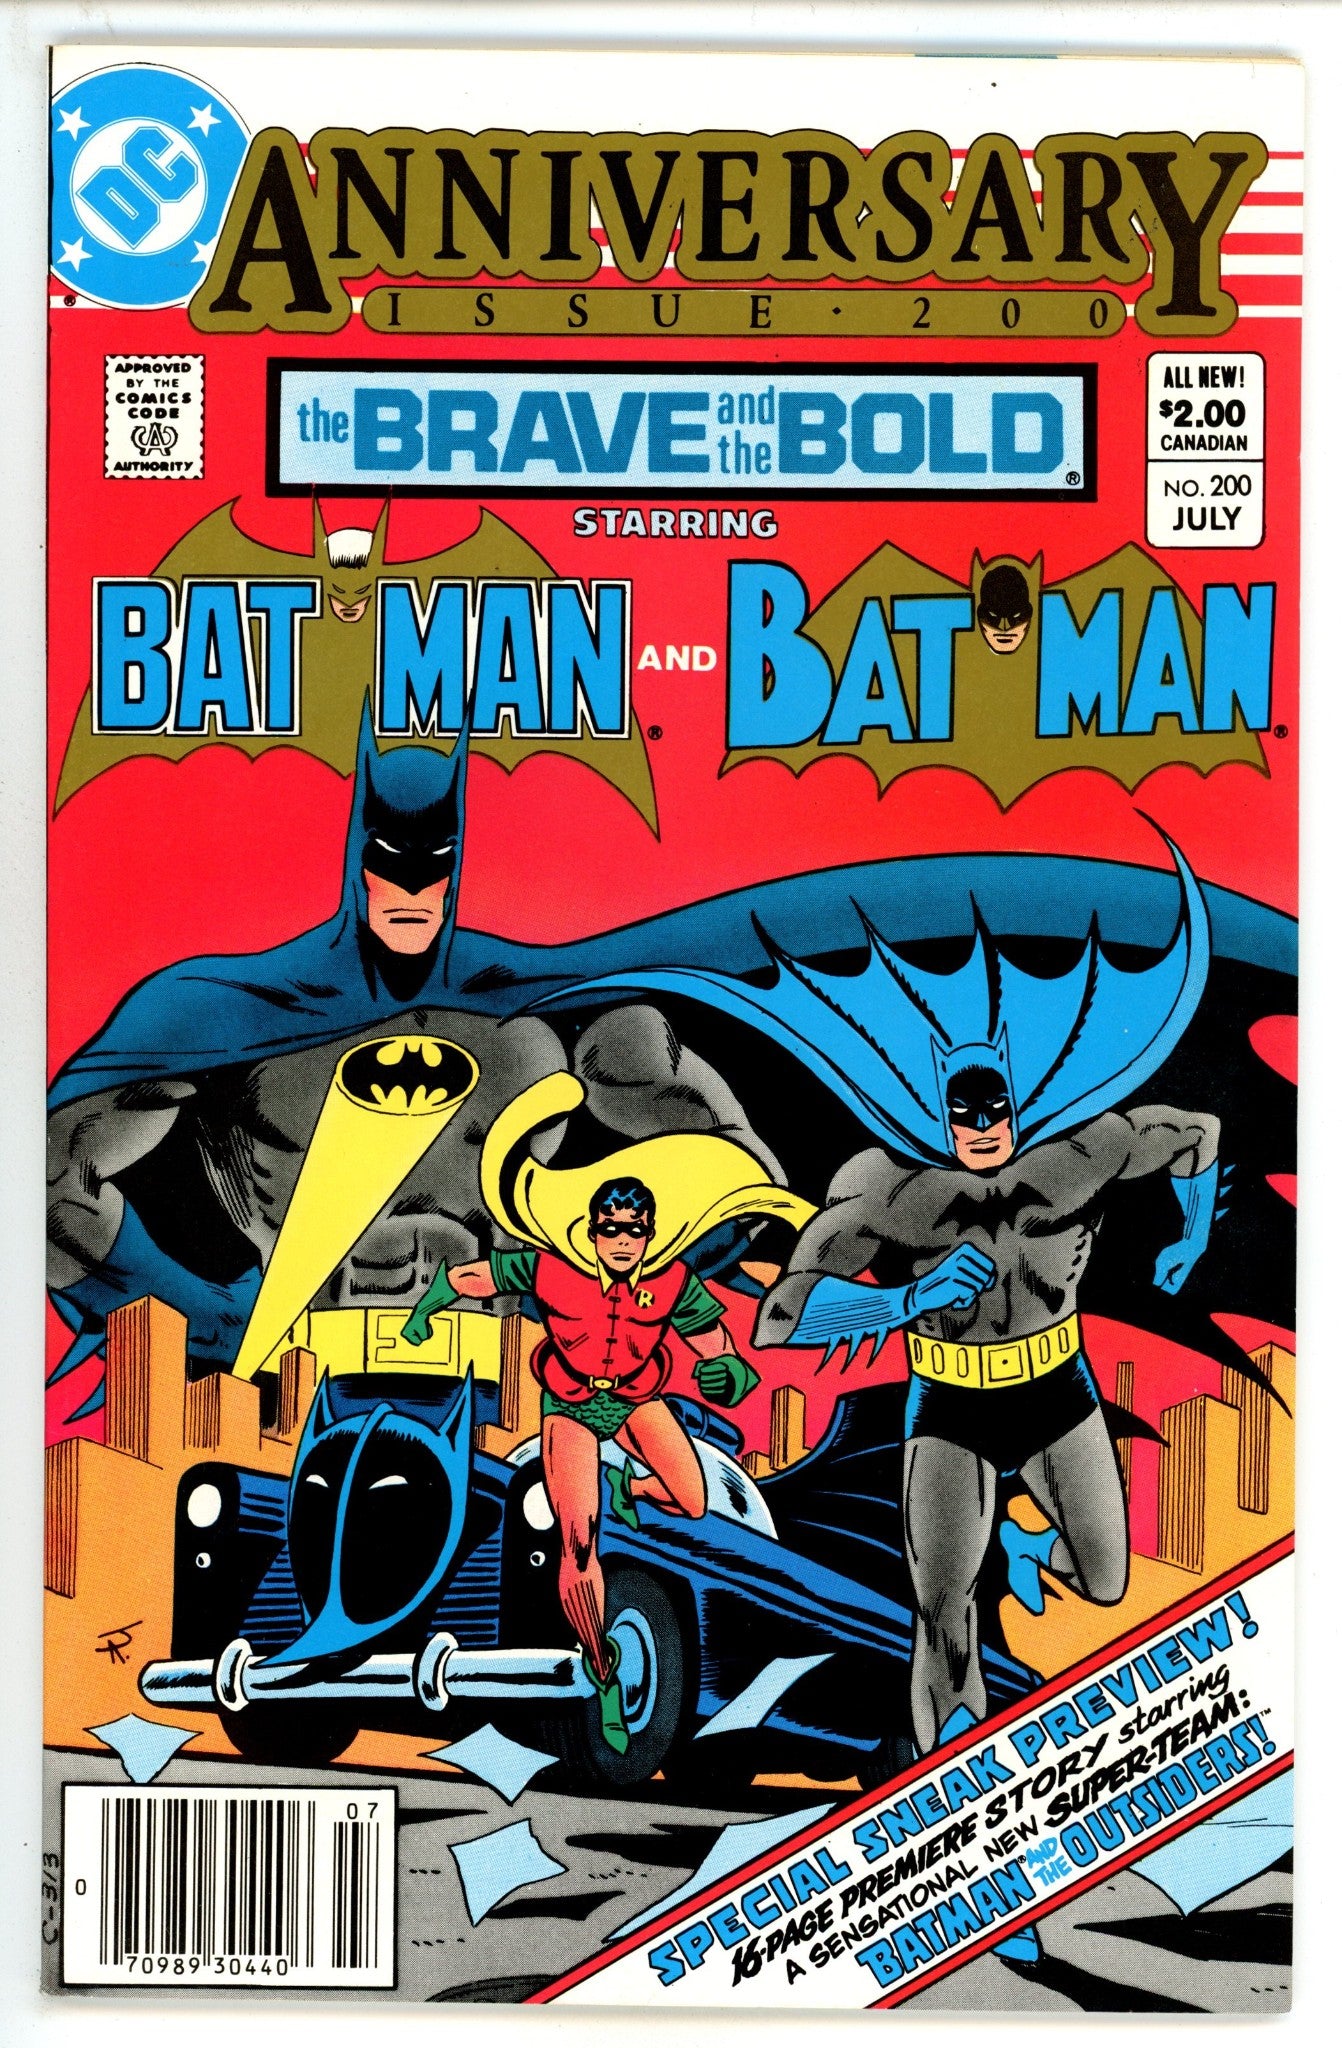 The Brave and the Bold Vol 1 200 VF (8.0) (1983) Canadian Price Variant 